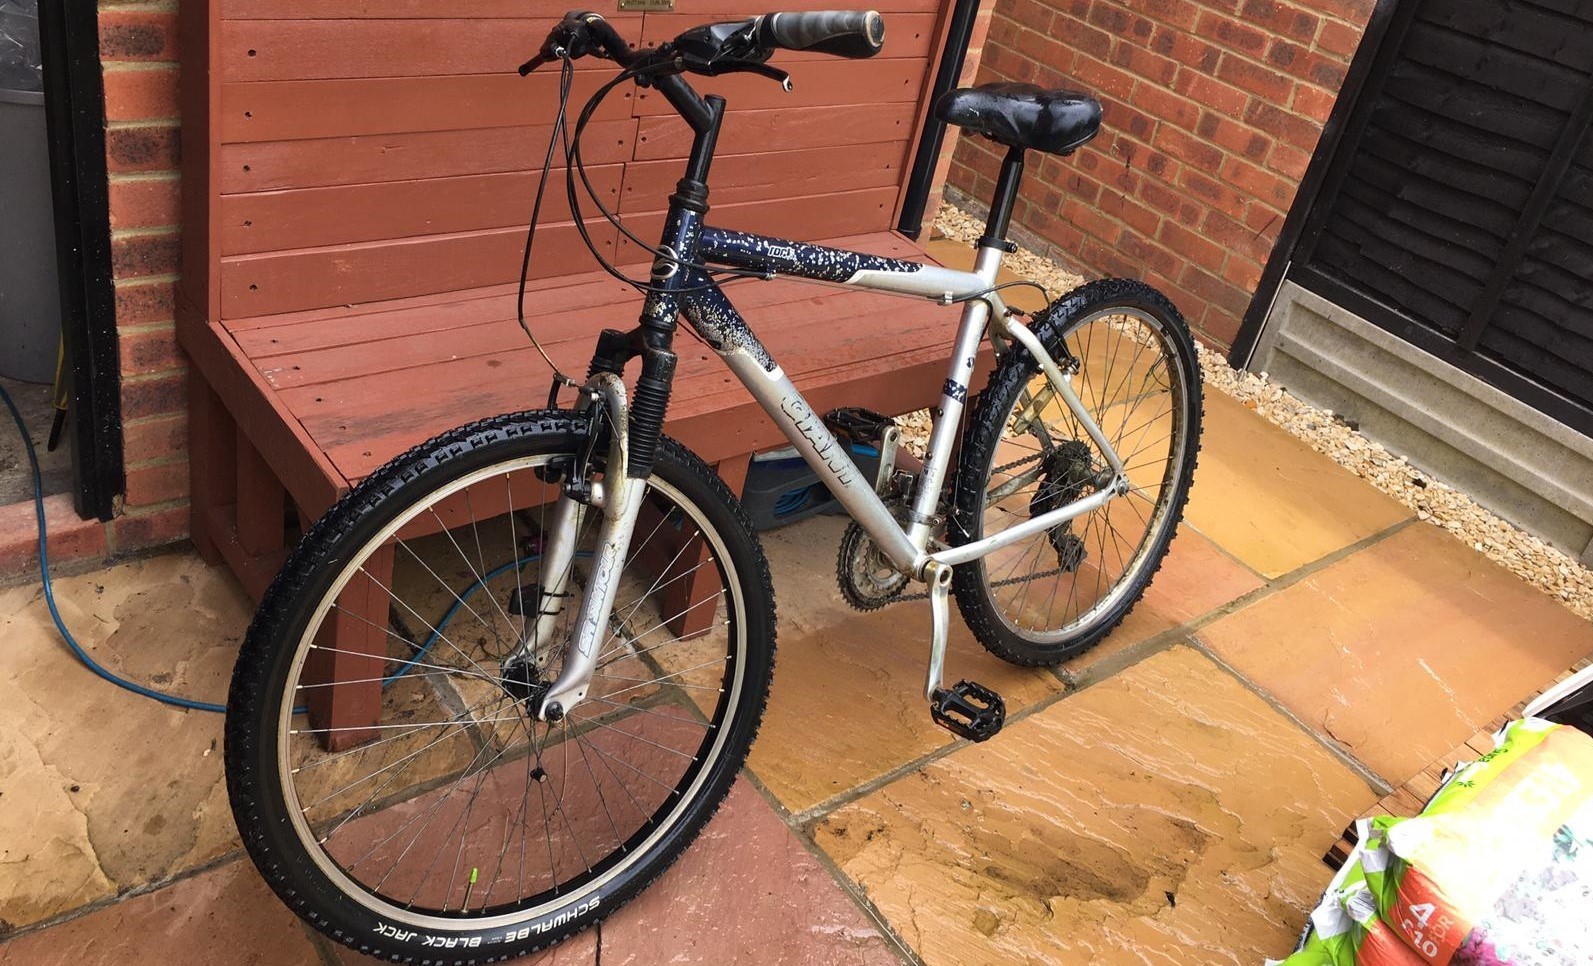 The bike was found in the Aylesbury stretch of the Grand Union Canal on May 23